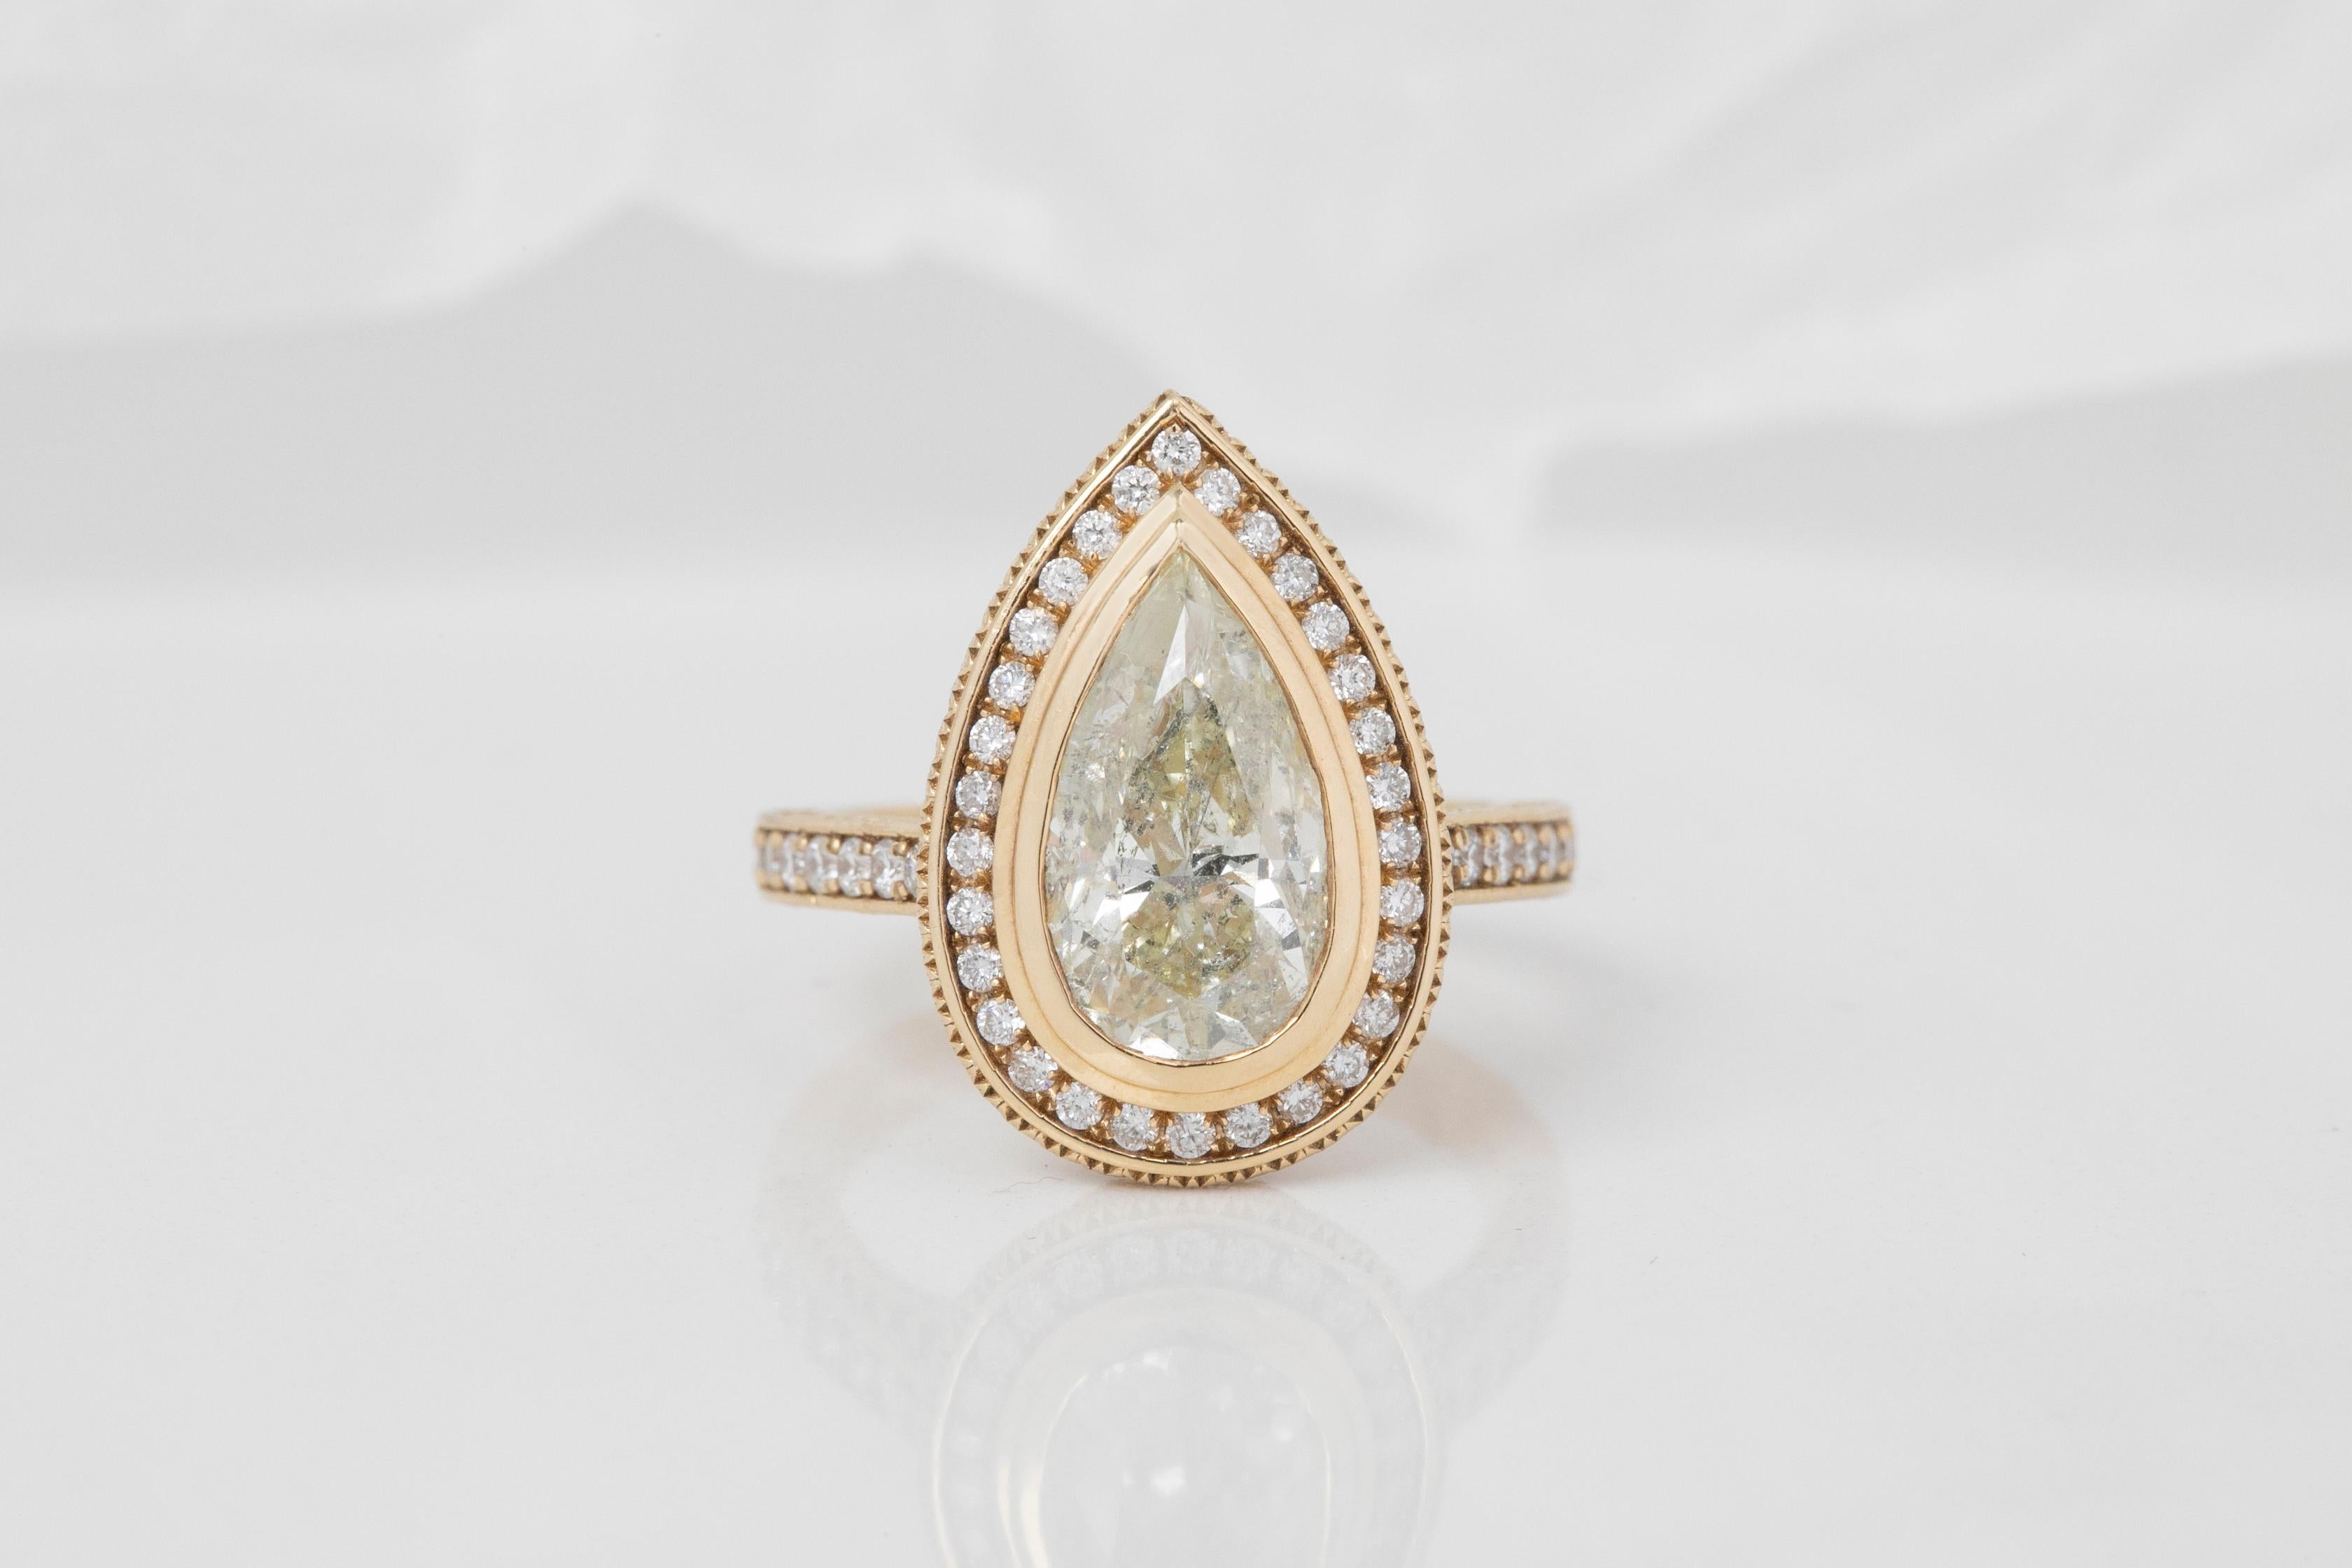 Artist Vintage Ring 3.46 Carat Diamond Pear Drop Cut Big Stone and 14k Solid Gold Ring For Sale